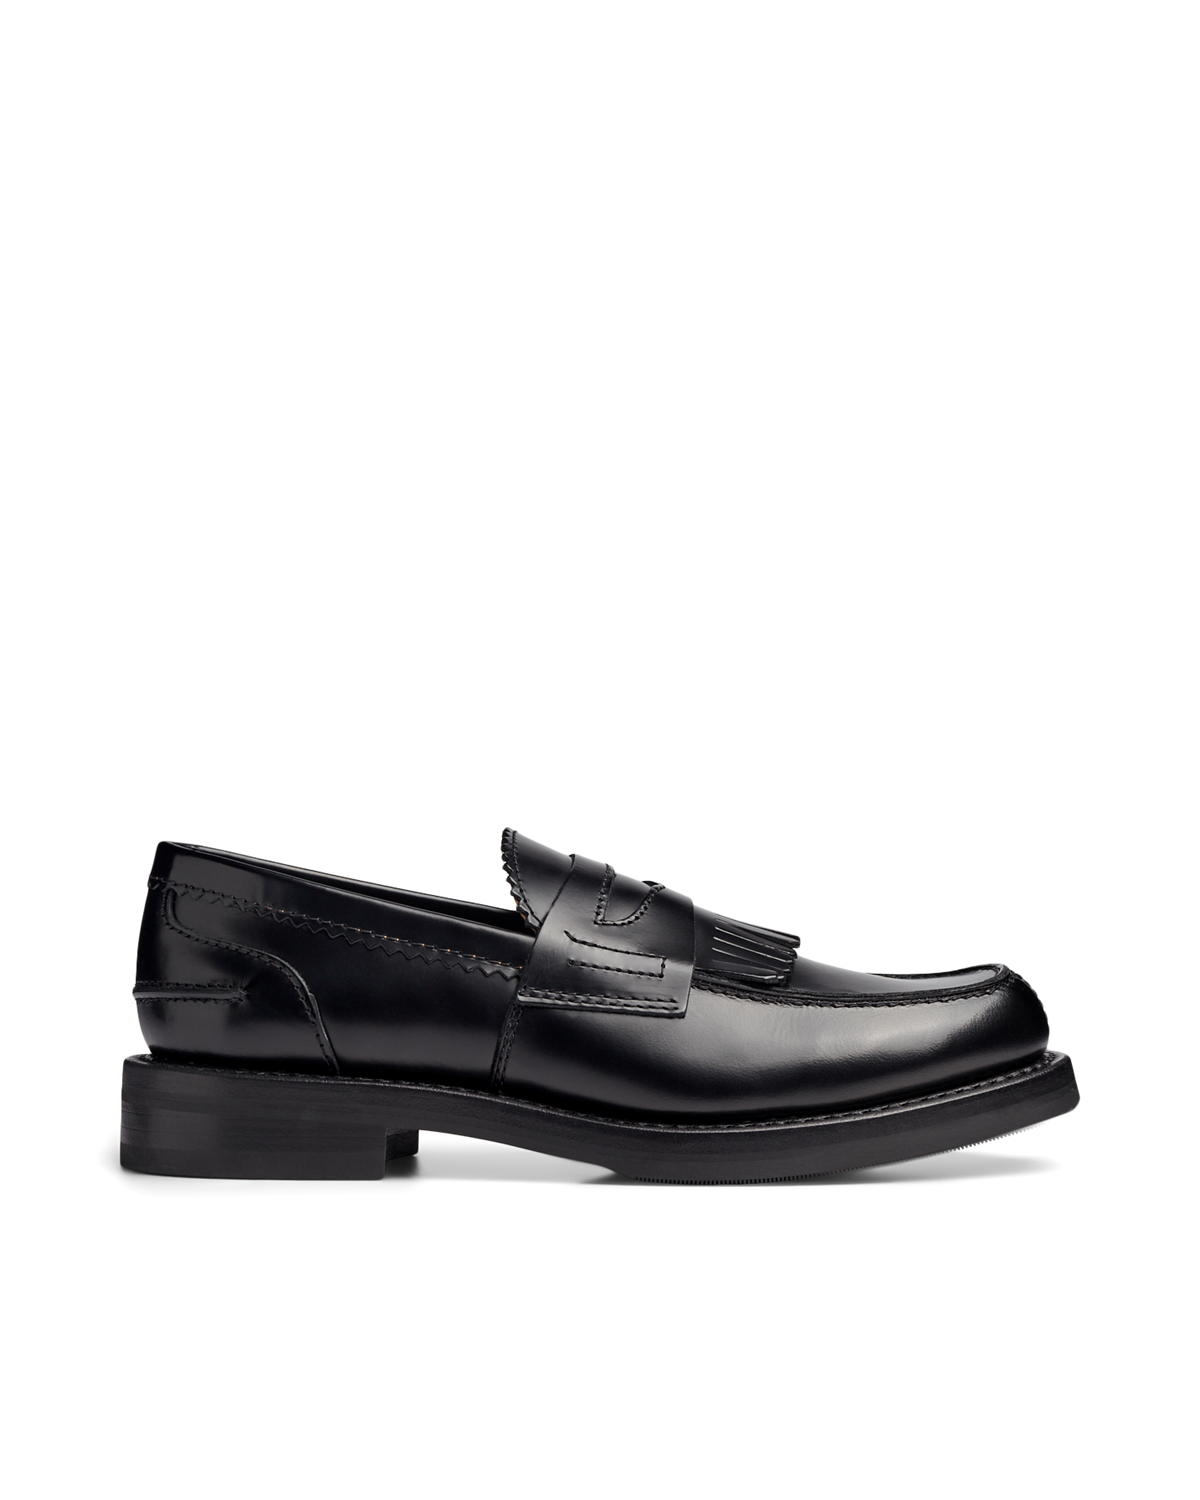 Loafer $175 Our Legacy Footwear Shoes Black